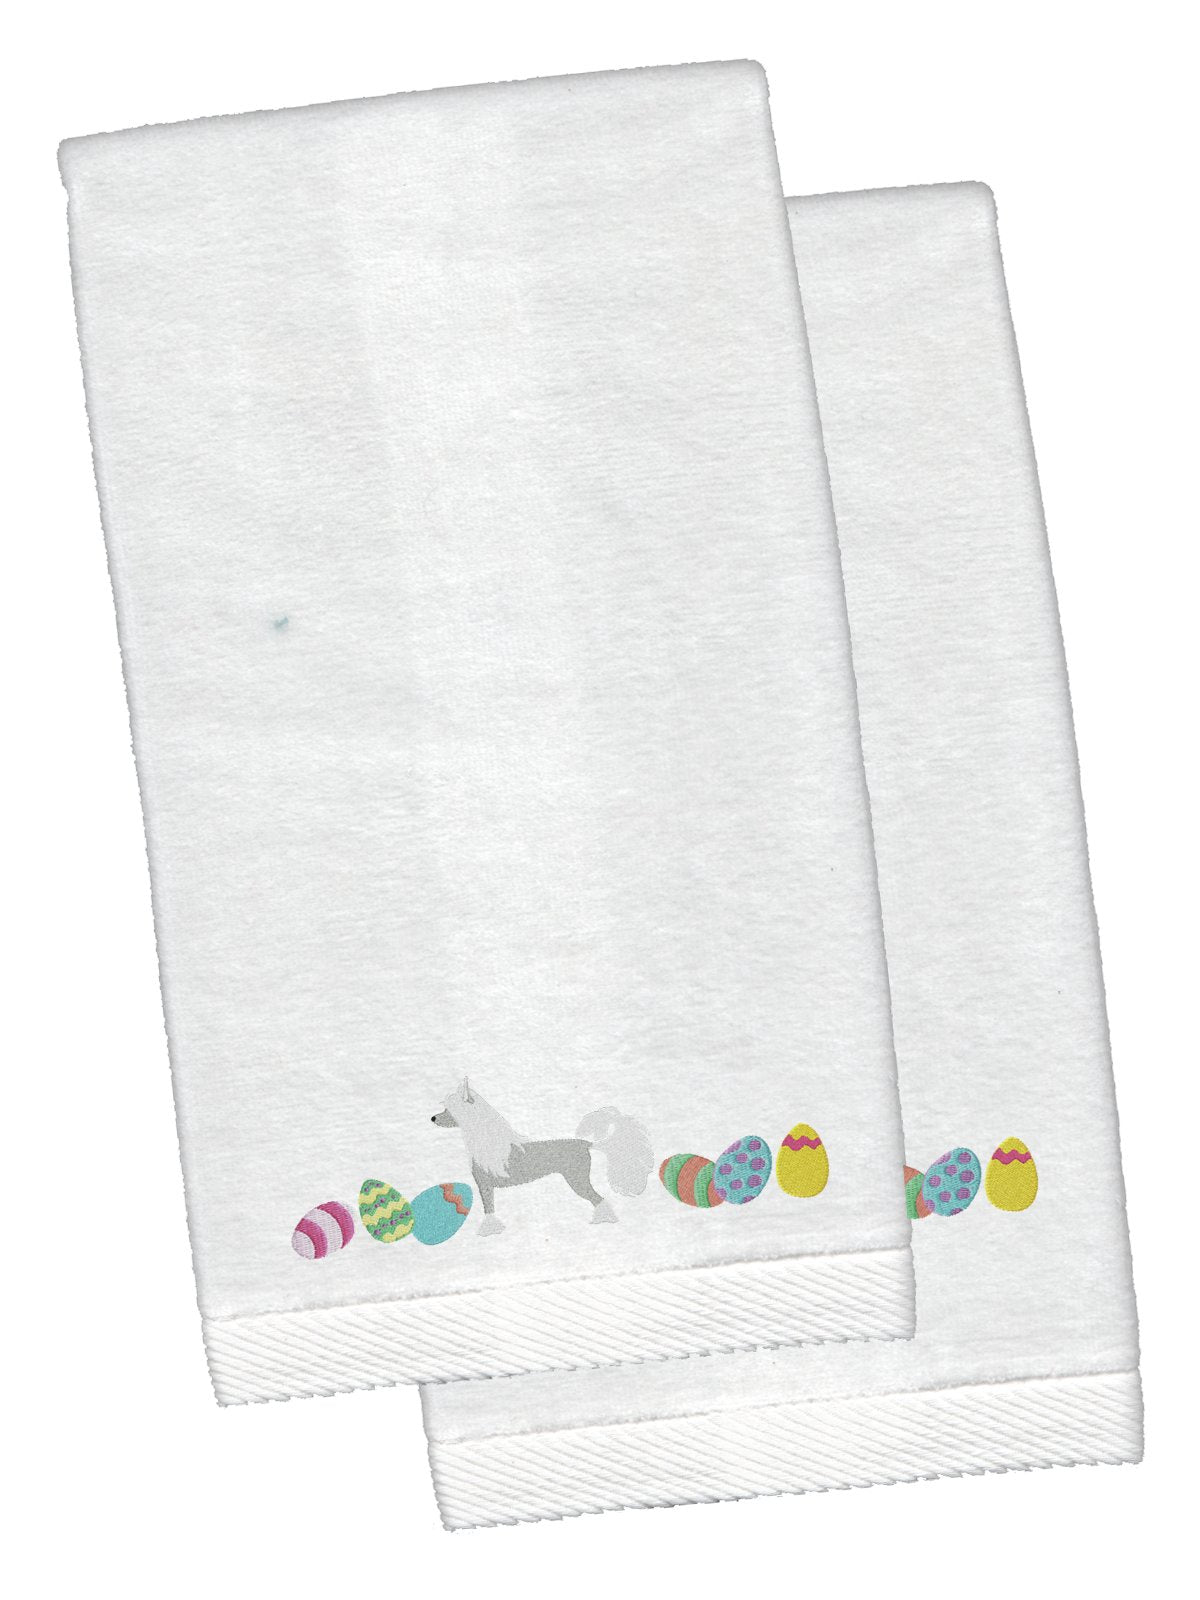 Chinese Crested Easter White Embroidered Plush Hand Towel Set of 2 CK1625KTEMB by Caroline's Treasures